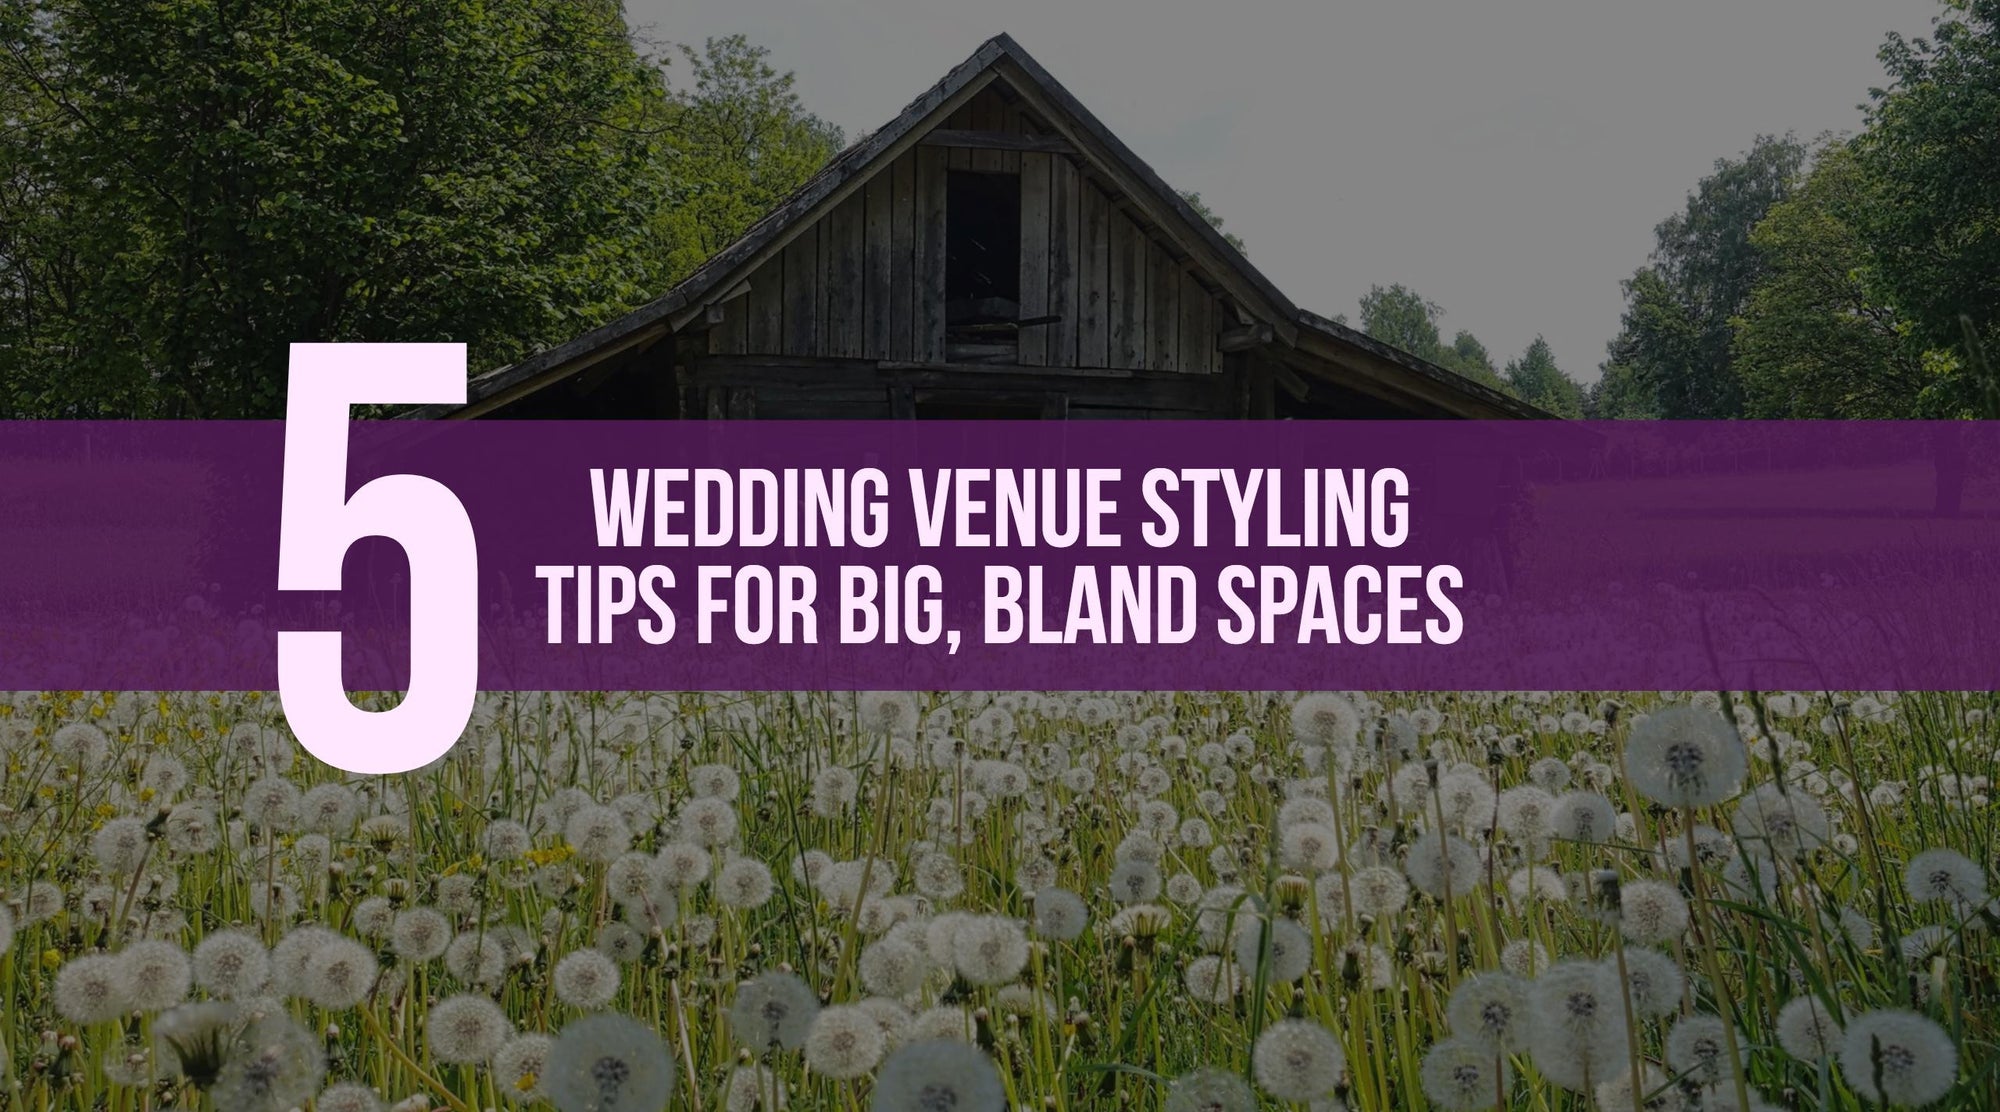 5 Wedding Venue Styling Tips for Big, Bland Spaces